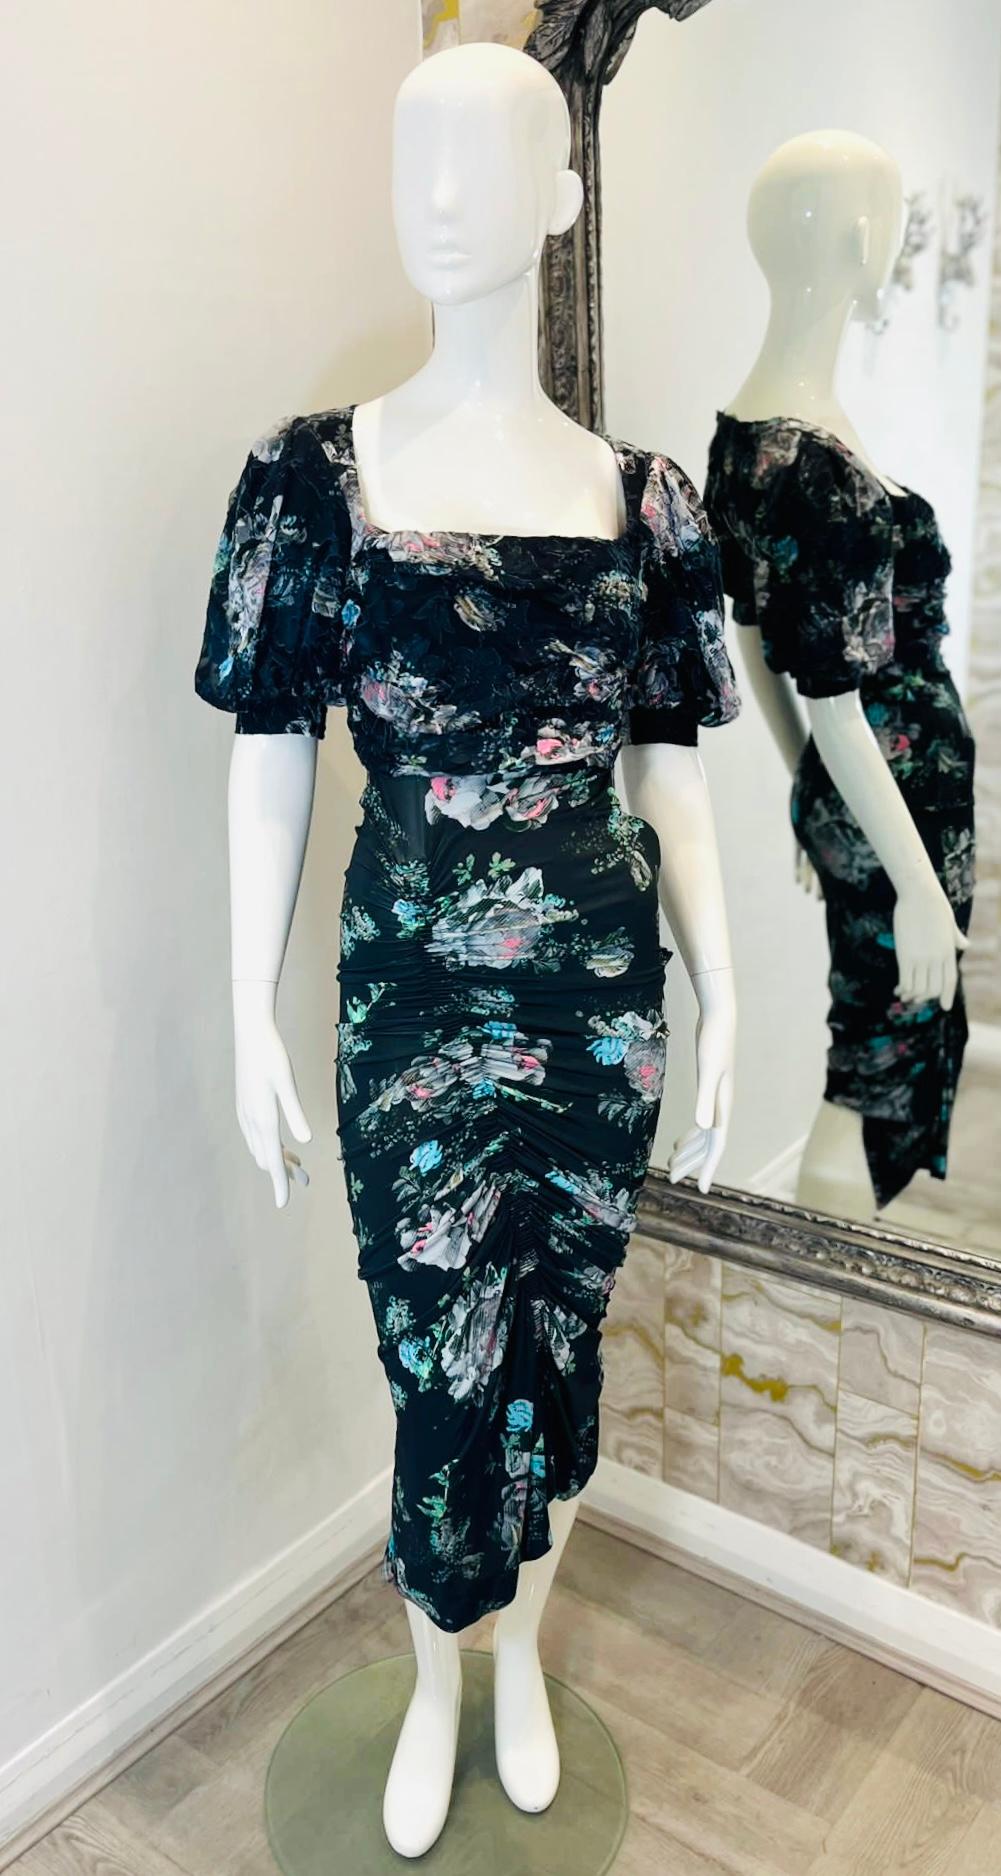 Preen By Thornton Bregazzi Silk Blend Floral Dress

Black midi dress designed with painterly floral blooms print.

Detailed with short balloon sleeves and square neckline.

Featuring asymmetric, ruched bodycon skirt and triangle shaped cut-out to